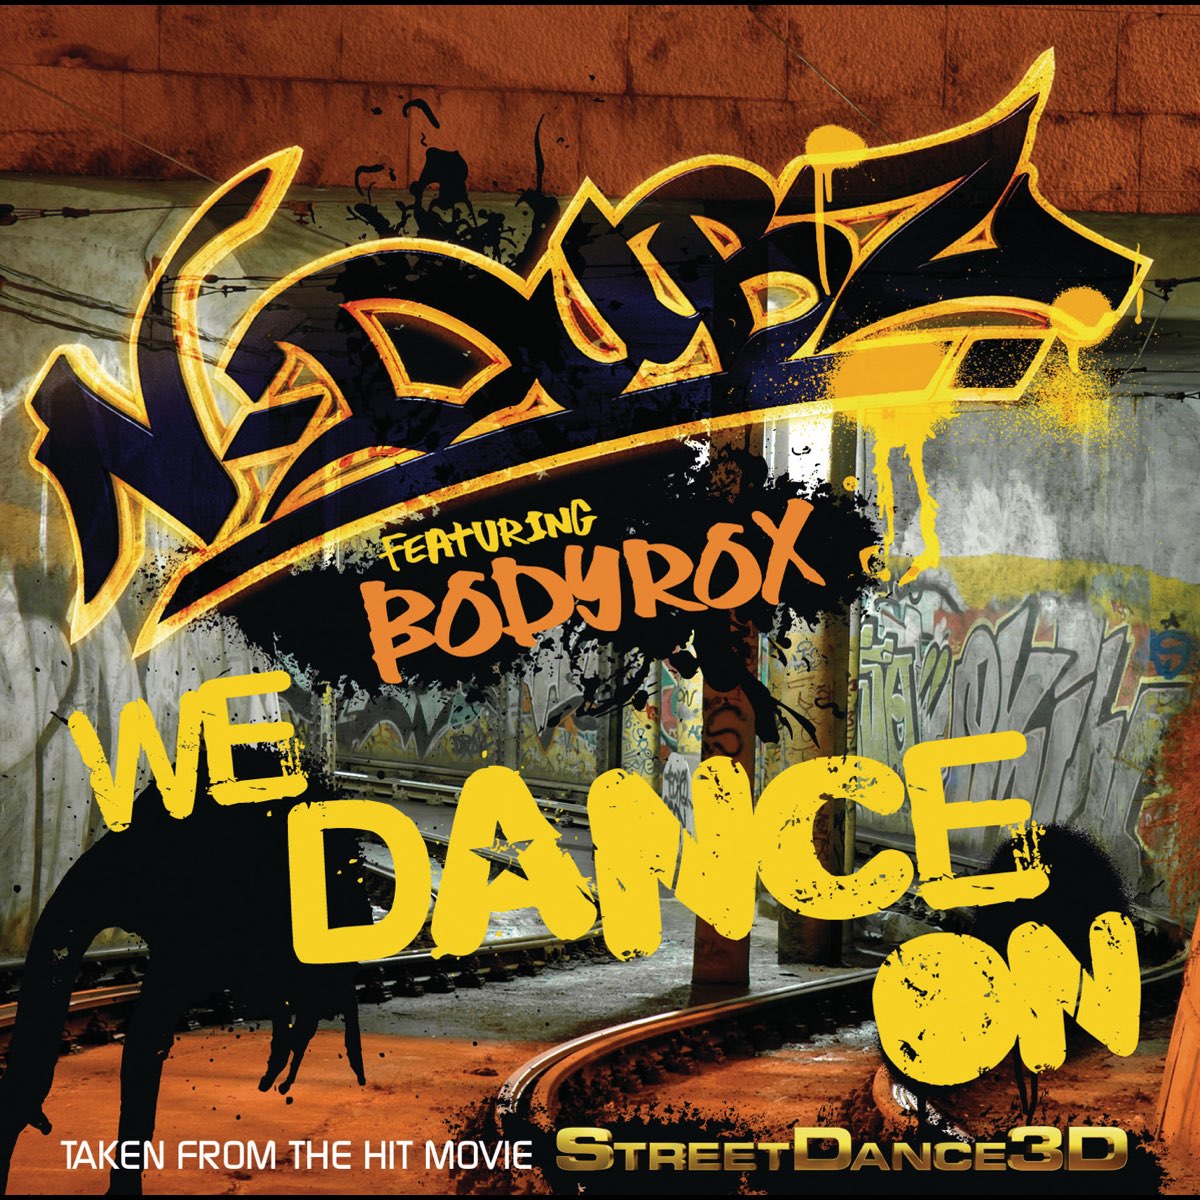 N-Dubz ft. featuring Bodyrox We Dance On cover artwork